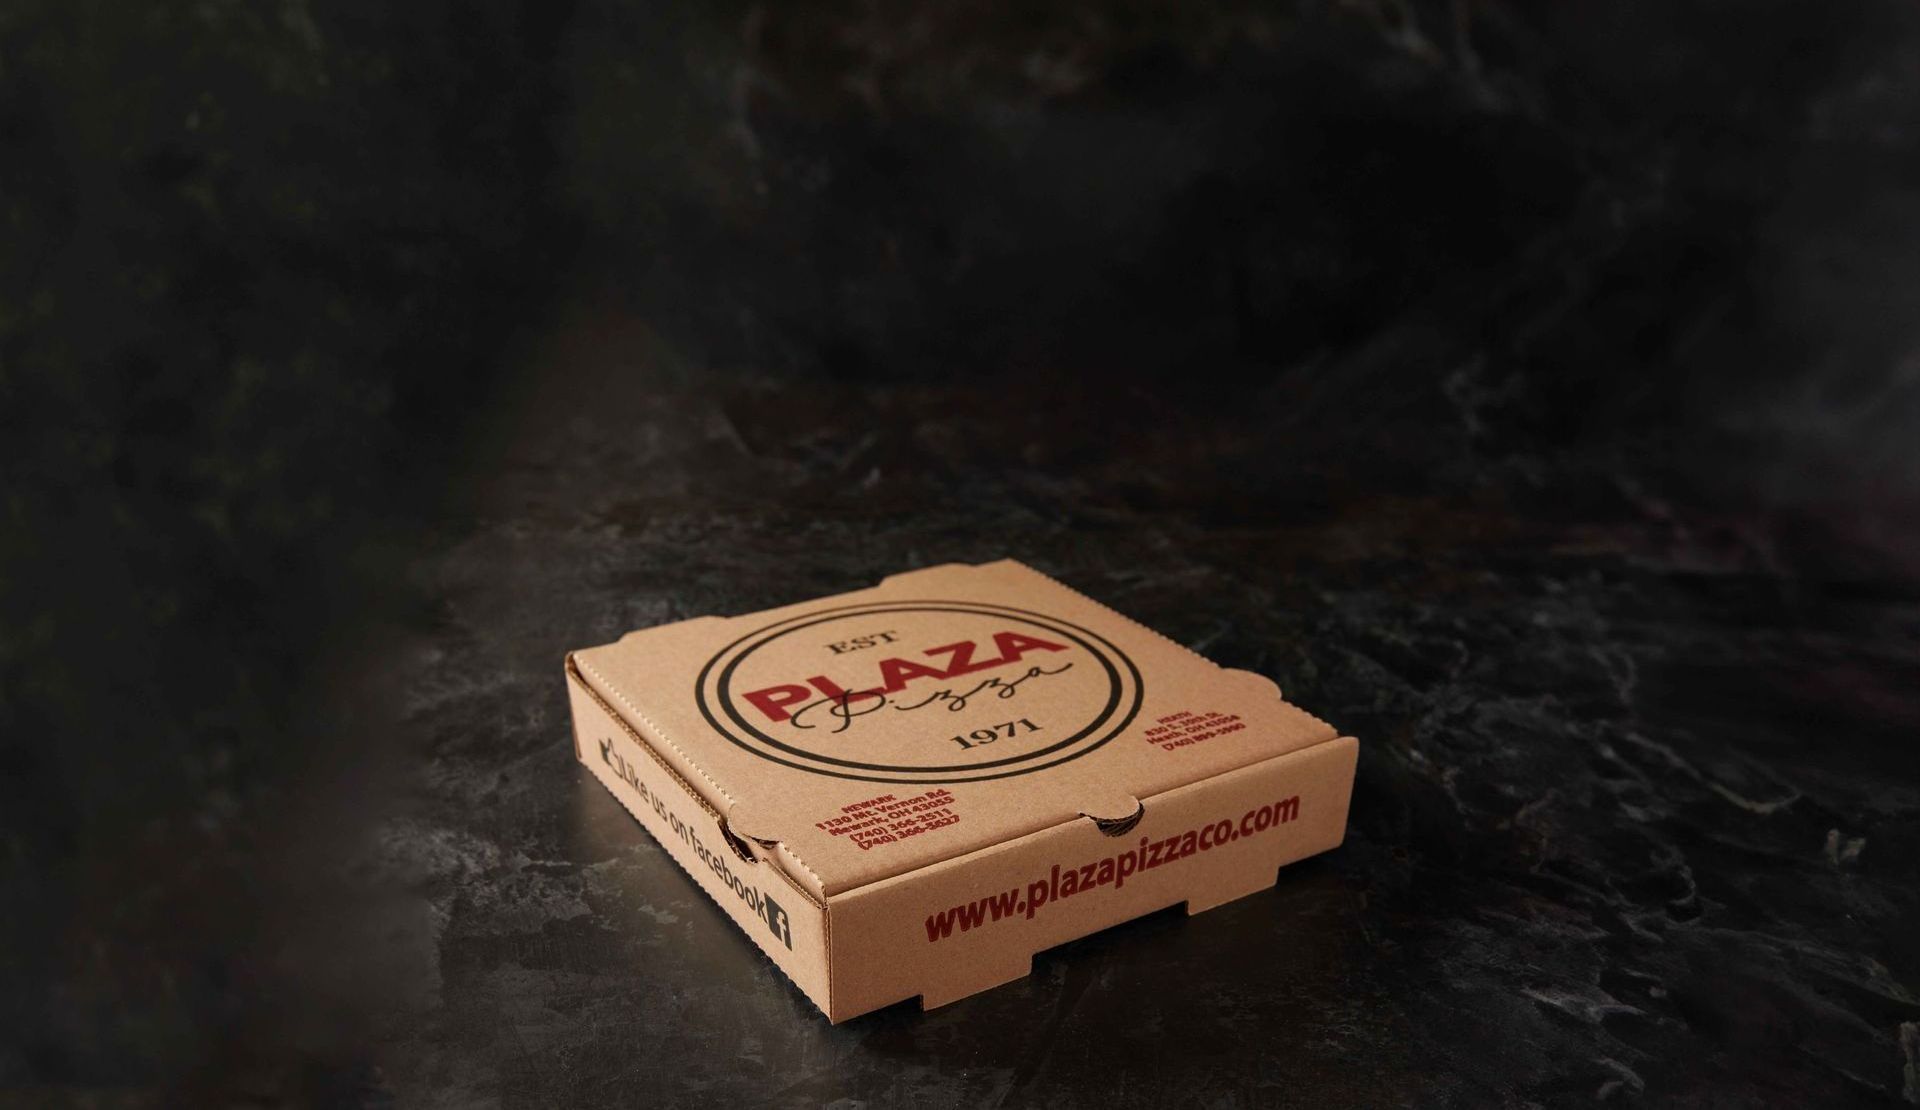 A plaza pizza box is sitting on a table.